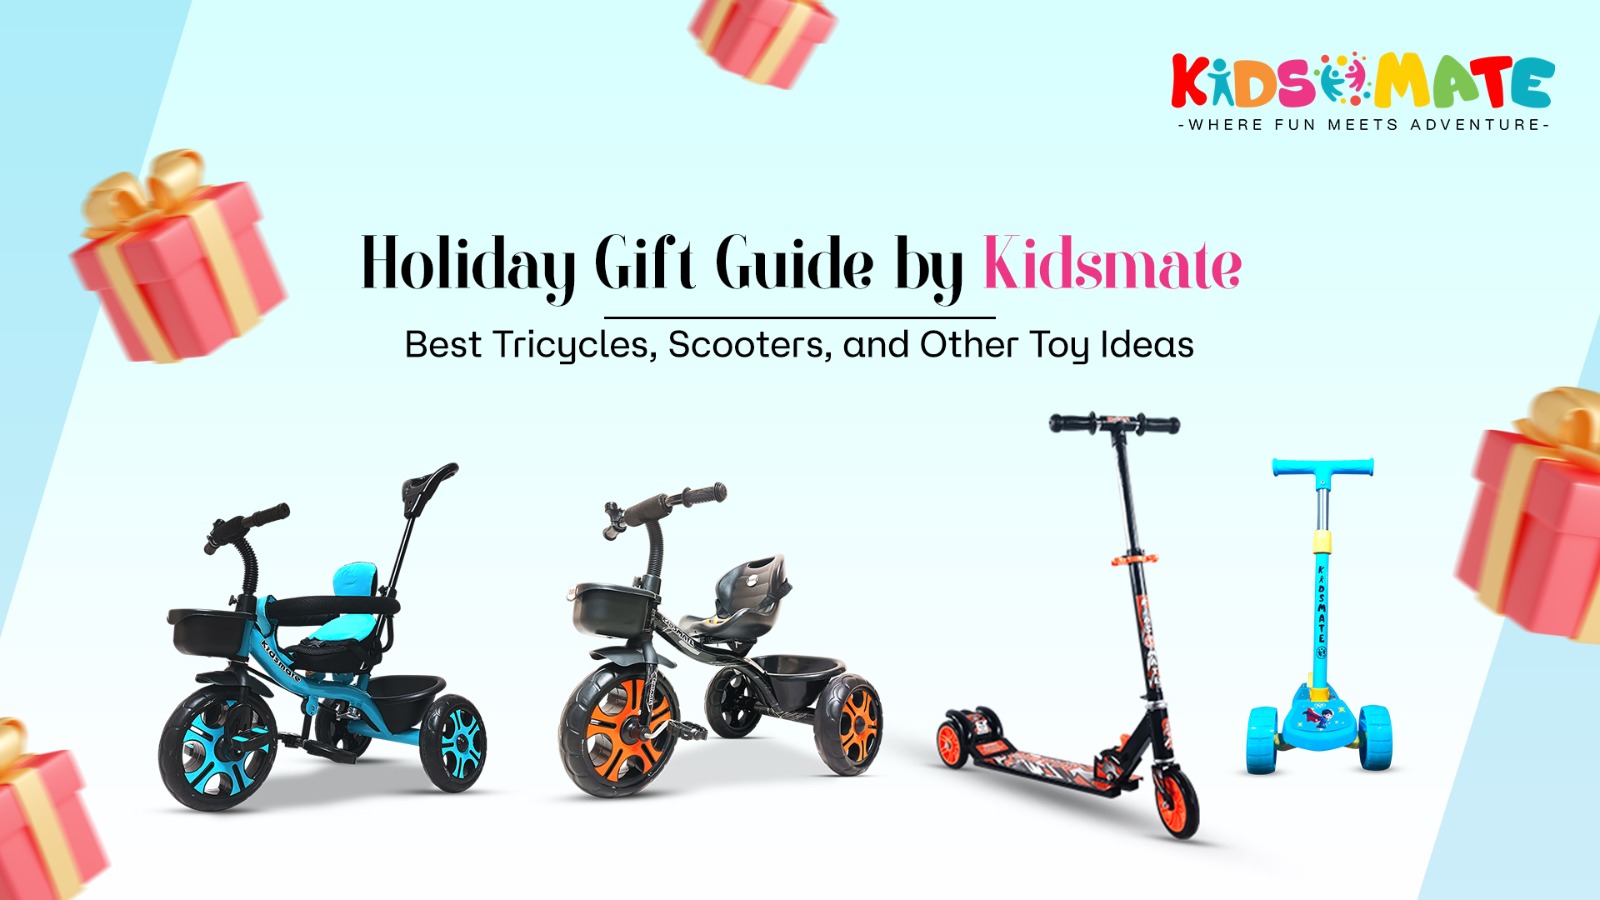 Holiday Gift Guide by Kidsmate: Best Tricycles, Scooters, and Other Toy Ideas